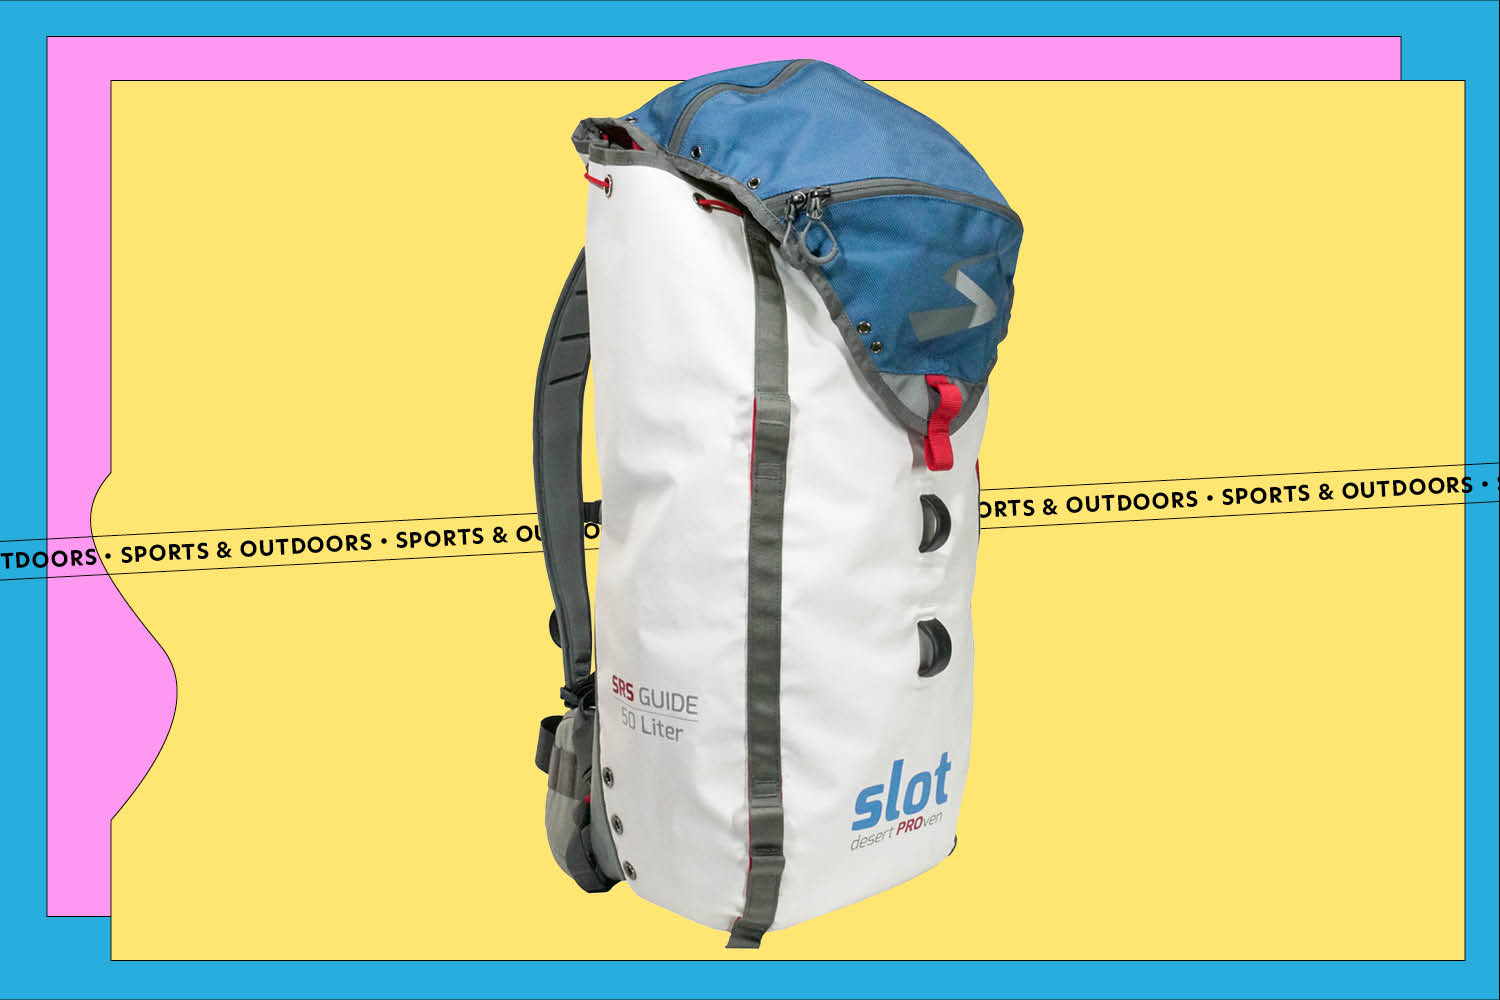 A Slot Canyon backpack on a yellow, pink, and blue background